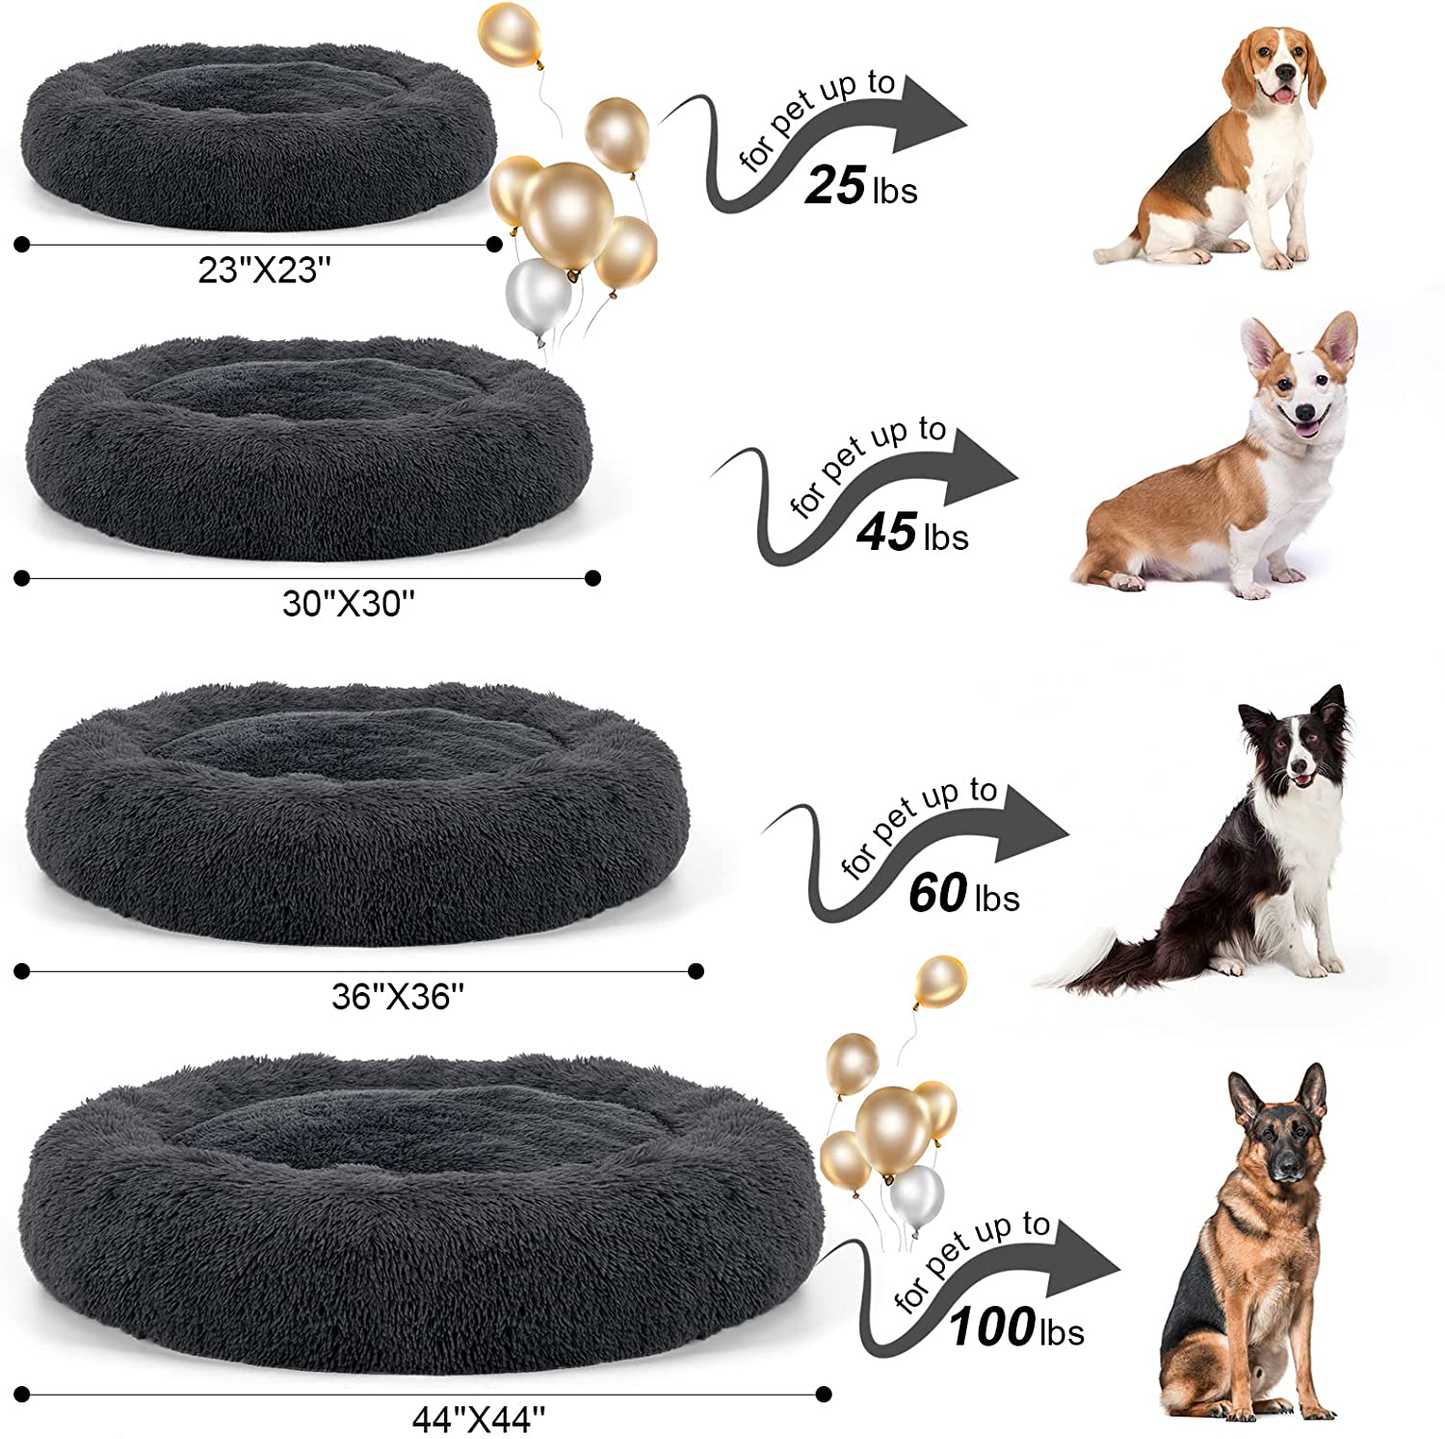 Dog Bed, Calming Cat Bed, Upgraded Thick Pet Donut Cuddler, Detachable Washable Cozy Bed with Anti-Slip & Water-Resistant Bottom, Pet Cushion Bed for Small Medium Large X-Large Dog or Cat